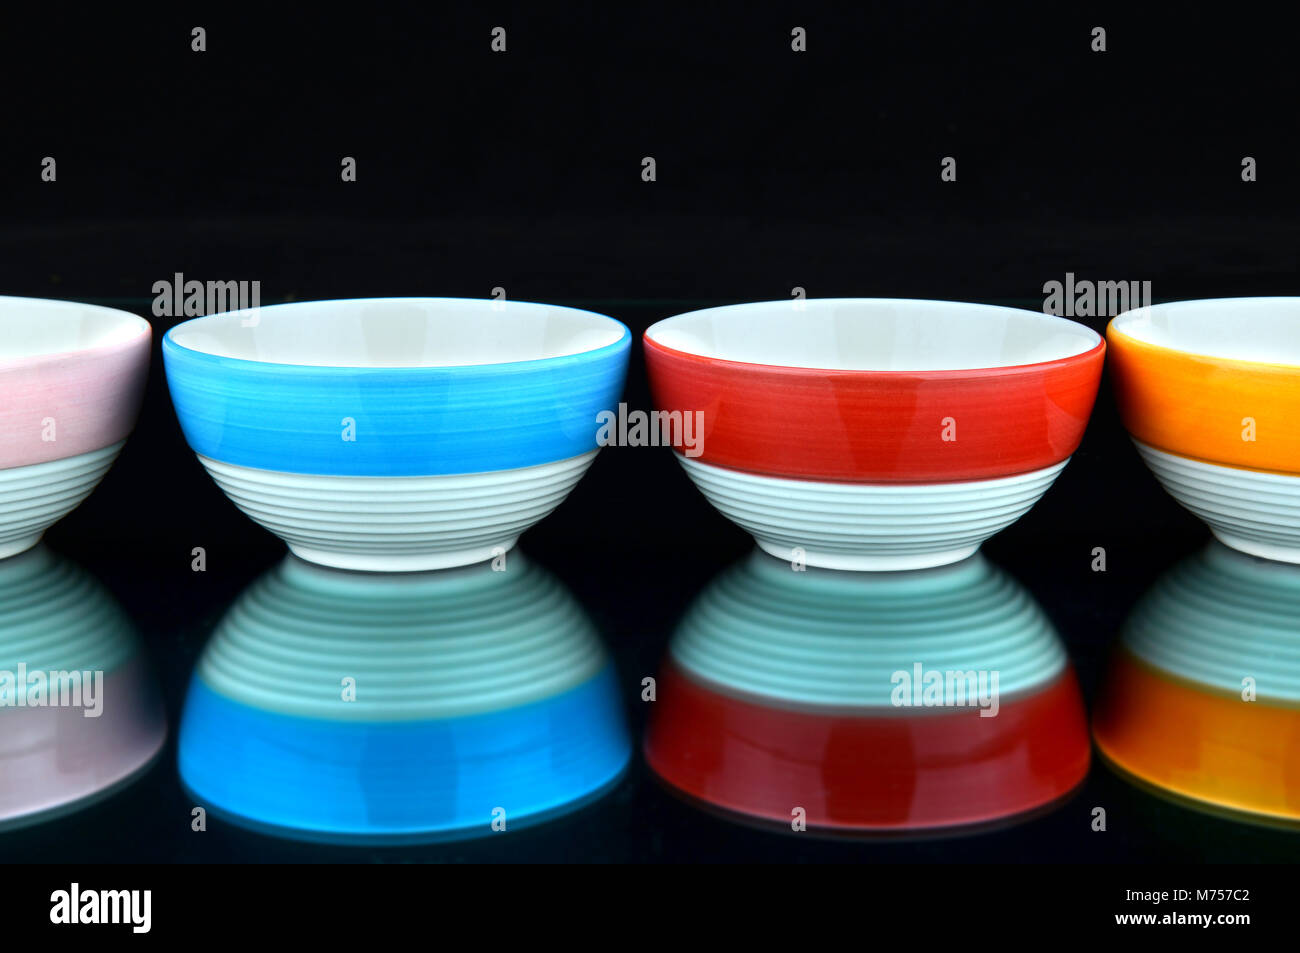 new collection of coceramic cup for the kitchen colorful life style Stock Photo